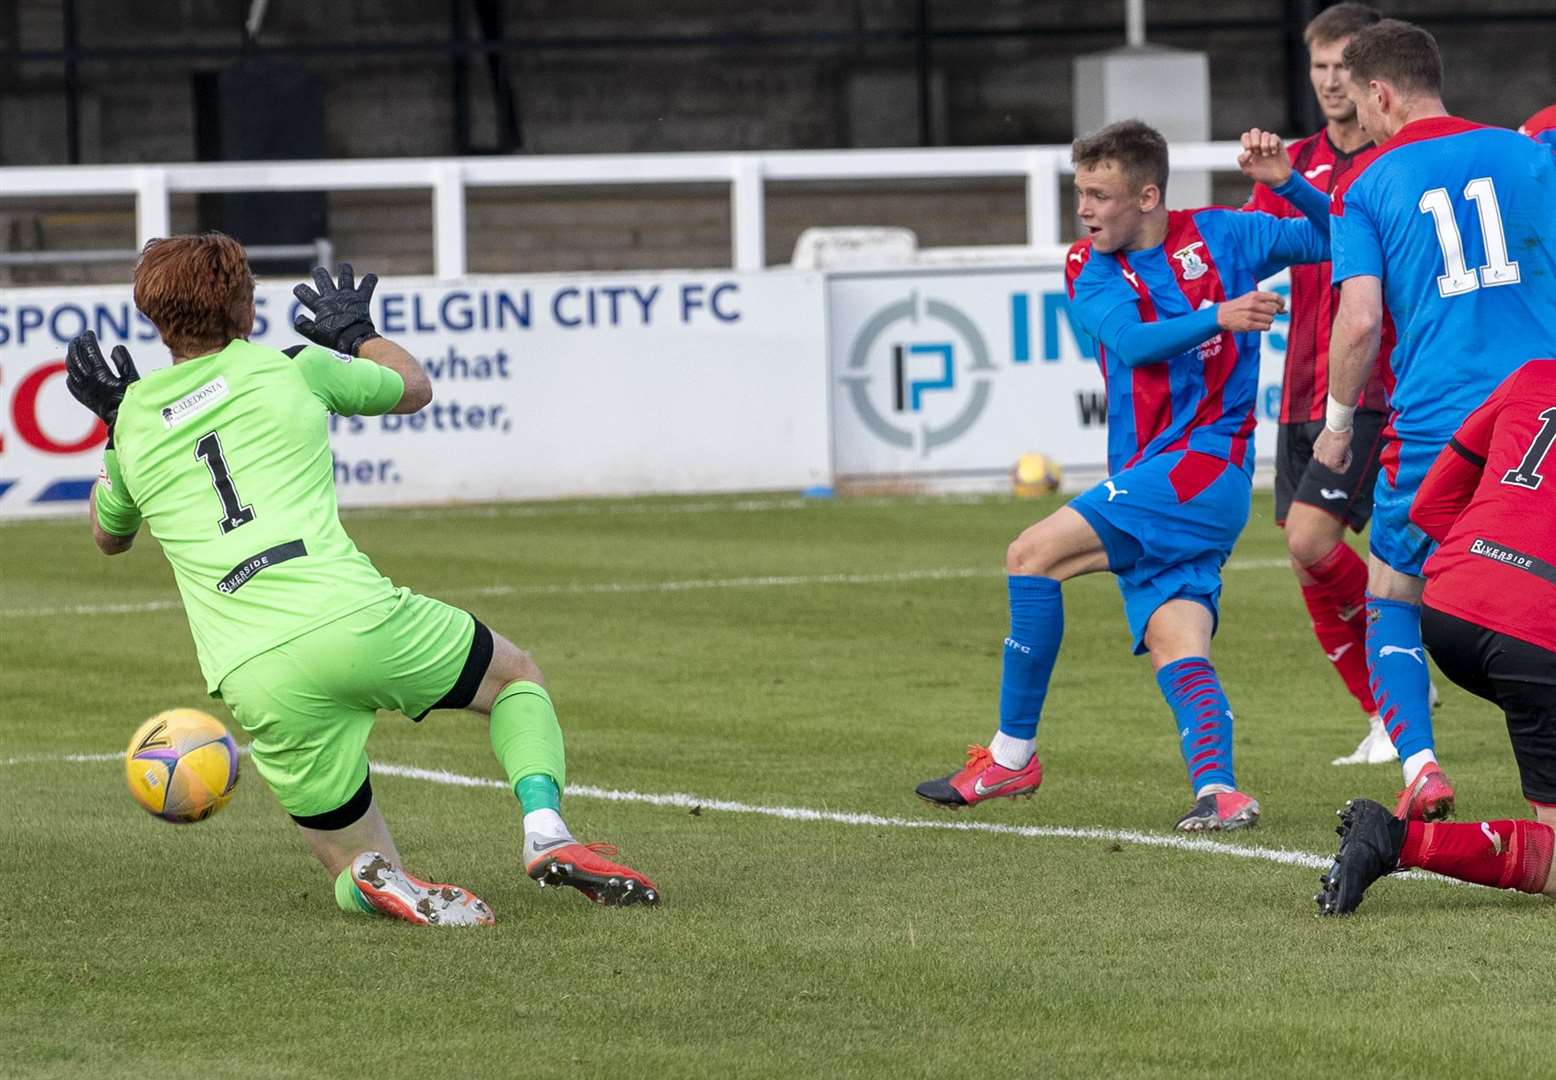 Picture - Ken Macpherson, Inverness. Pre-Season Friendly. Elgin City(3) v Inverness CT(7). 26.09.20. ICT's Roddy MacGregor scores his side's 5th goal past Elgin City 'keeper Tom McHale.